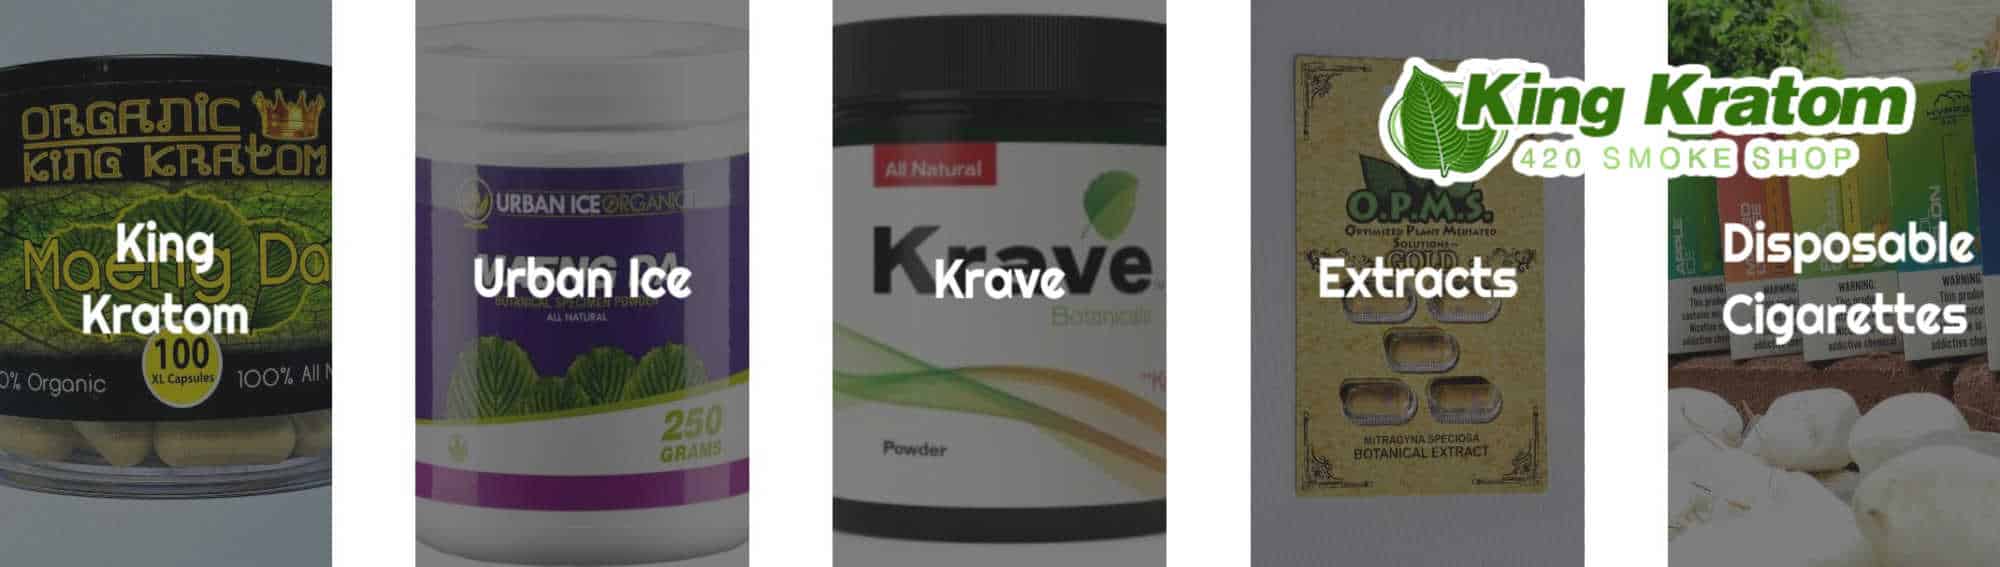 image of king kratom las vegas products review